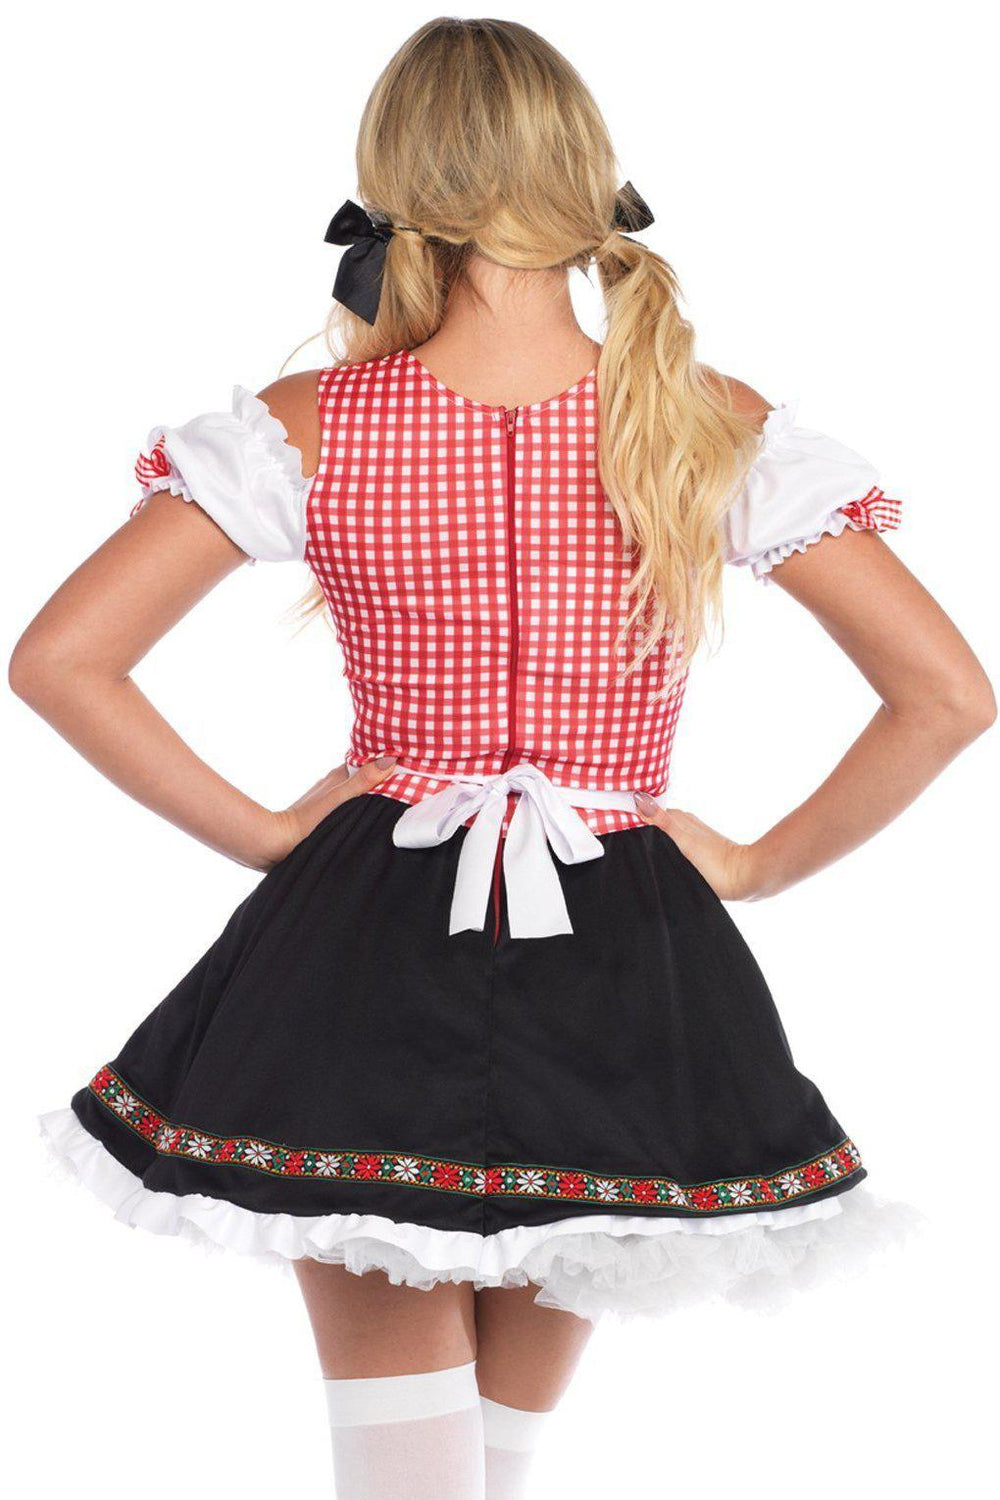 Beer Garden Babe Costume-Beer Girl Costumes-Leg Avenue-SEXYSHOES.COM